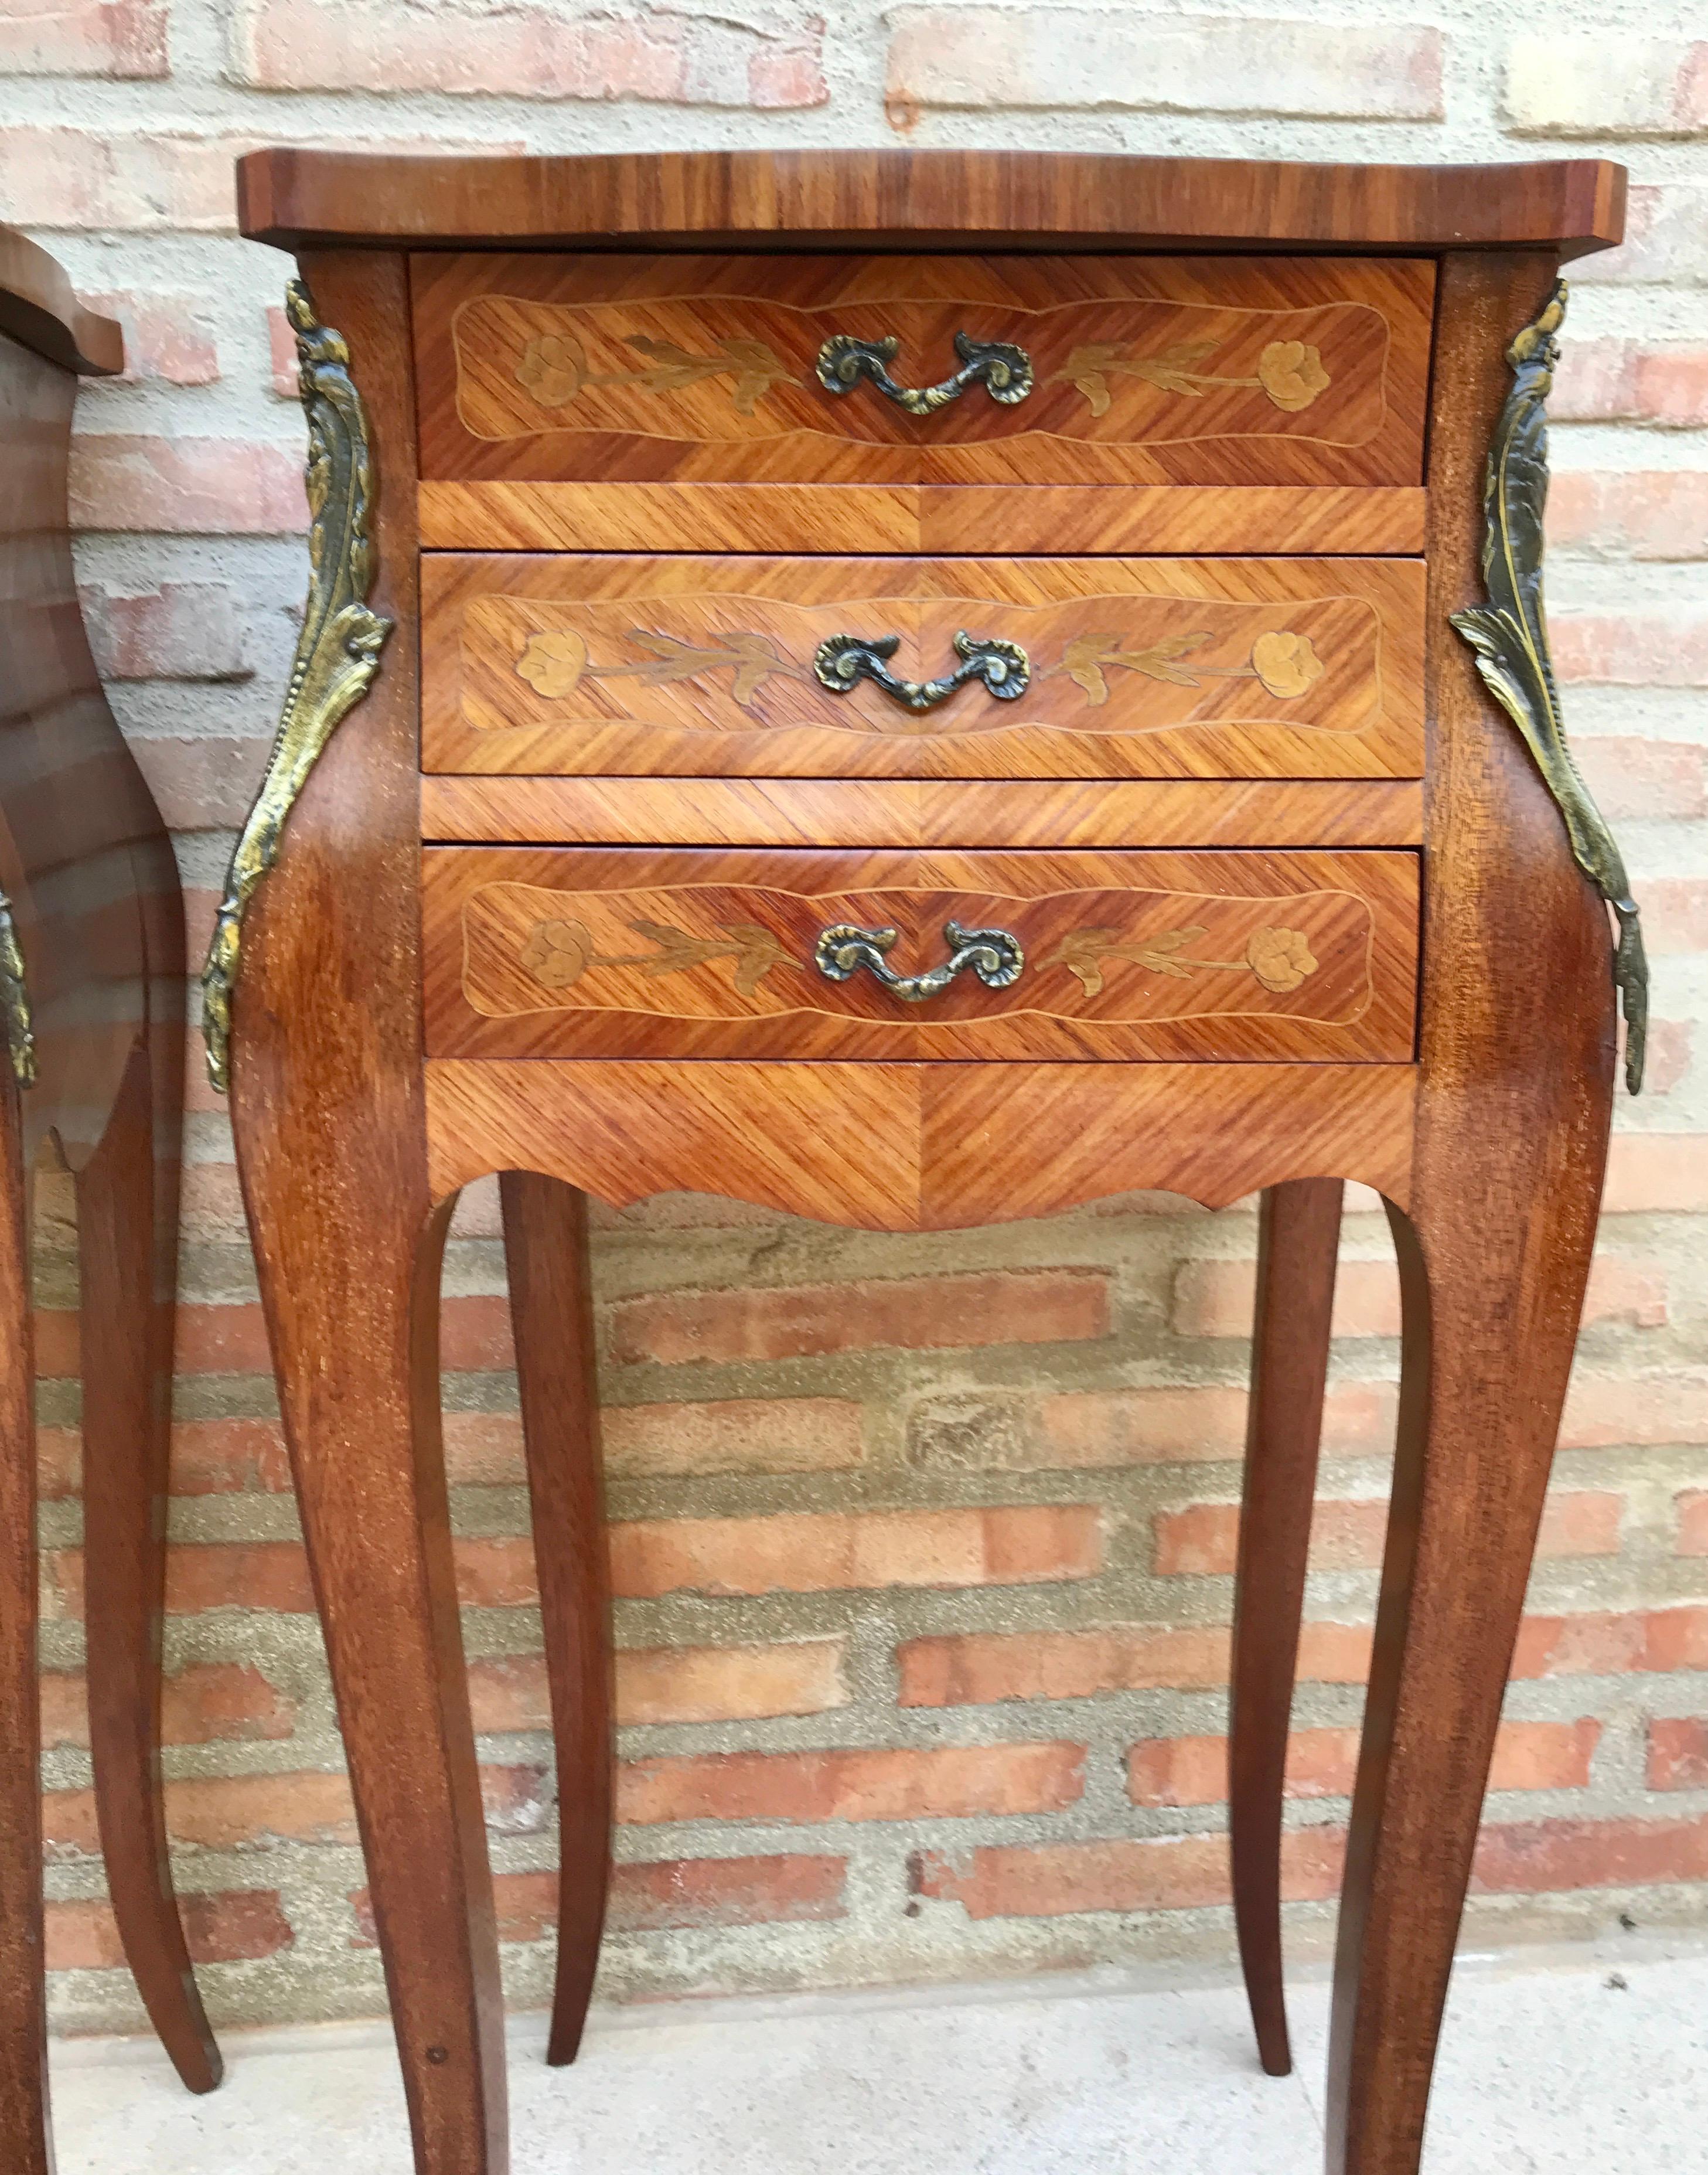 20th Century French Classic Louis Vx Style Marquetry Nightstands with Three Drawers, 1920s, S For Sale